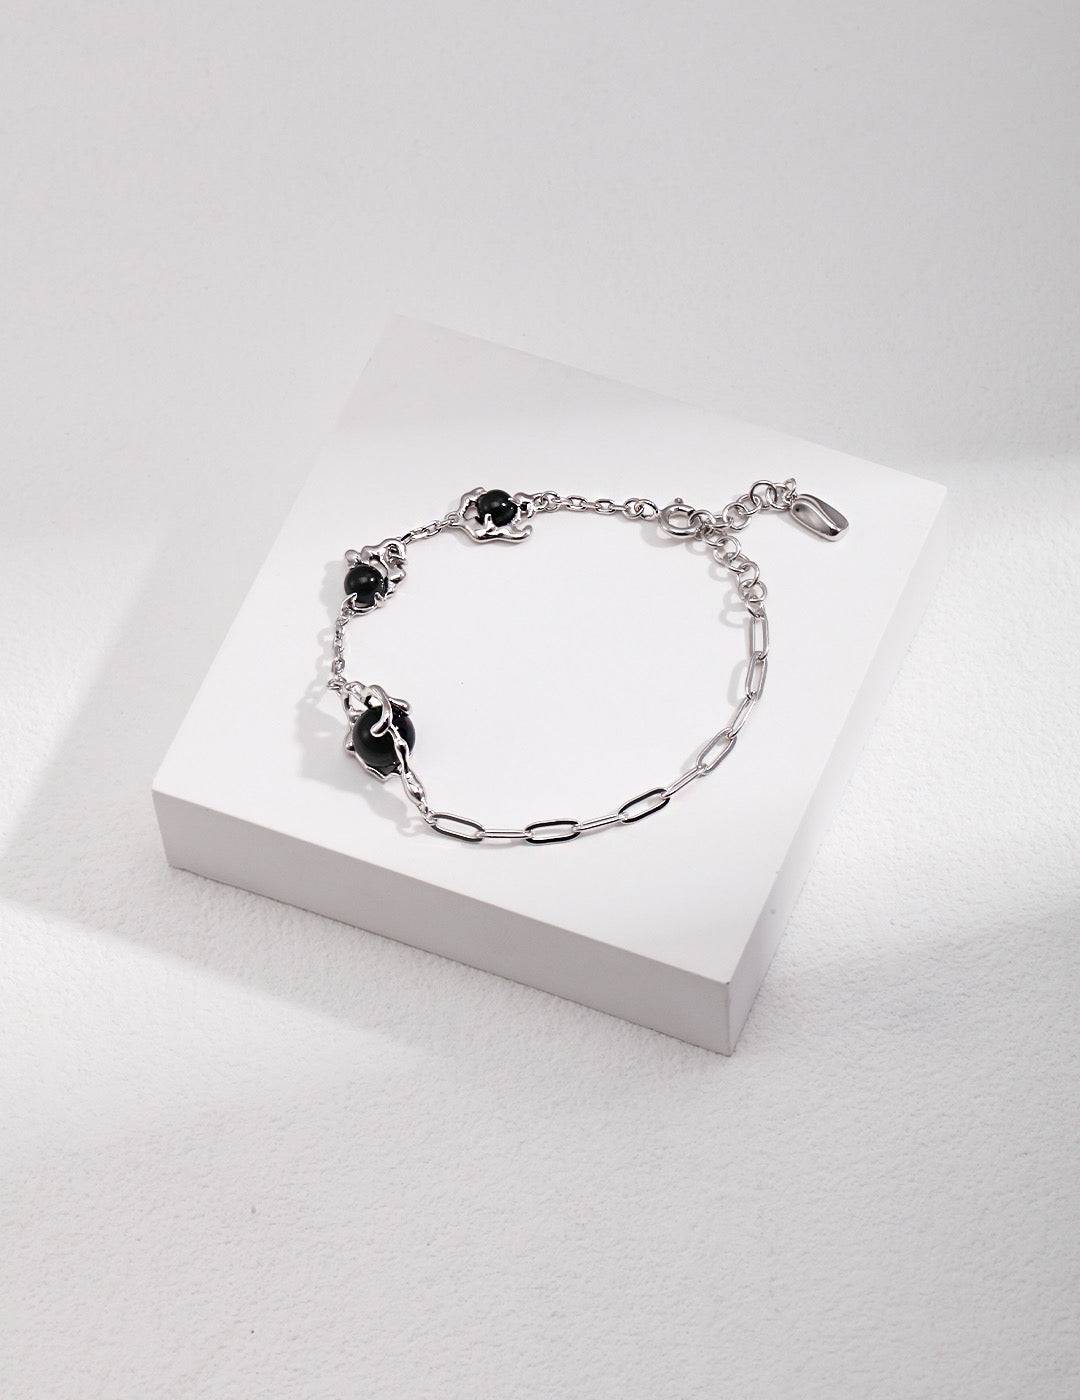 a silver chain bracelet with black agate stones